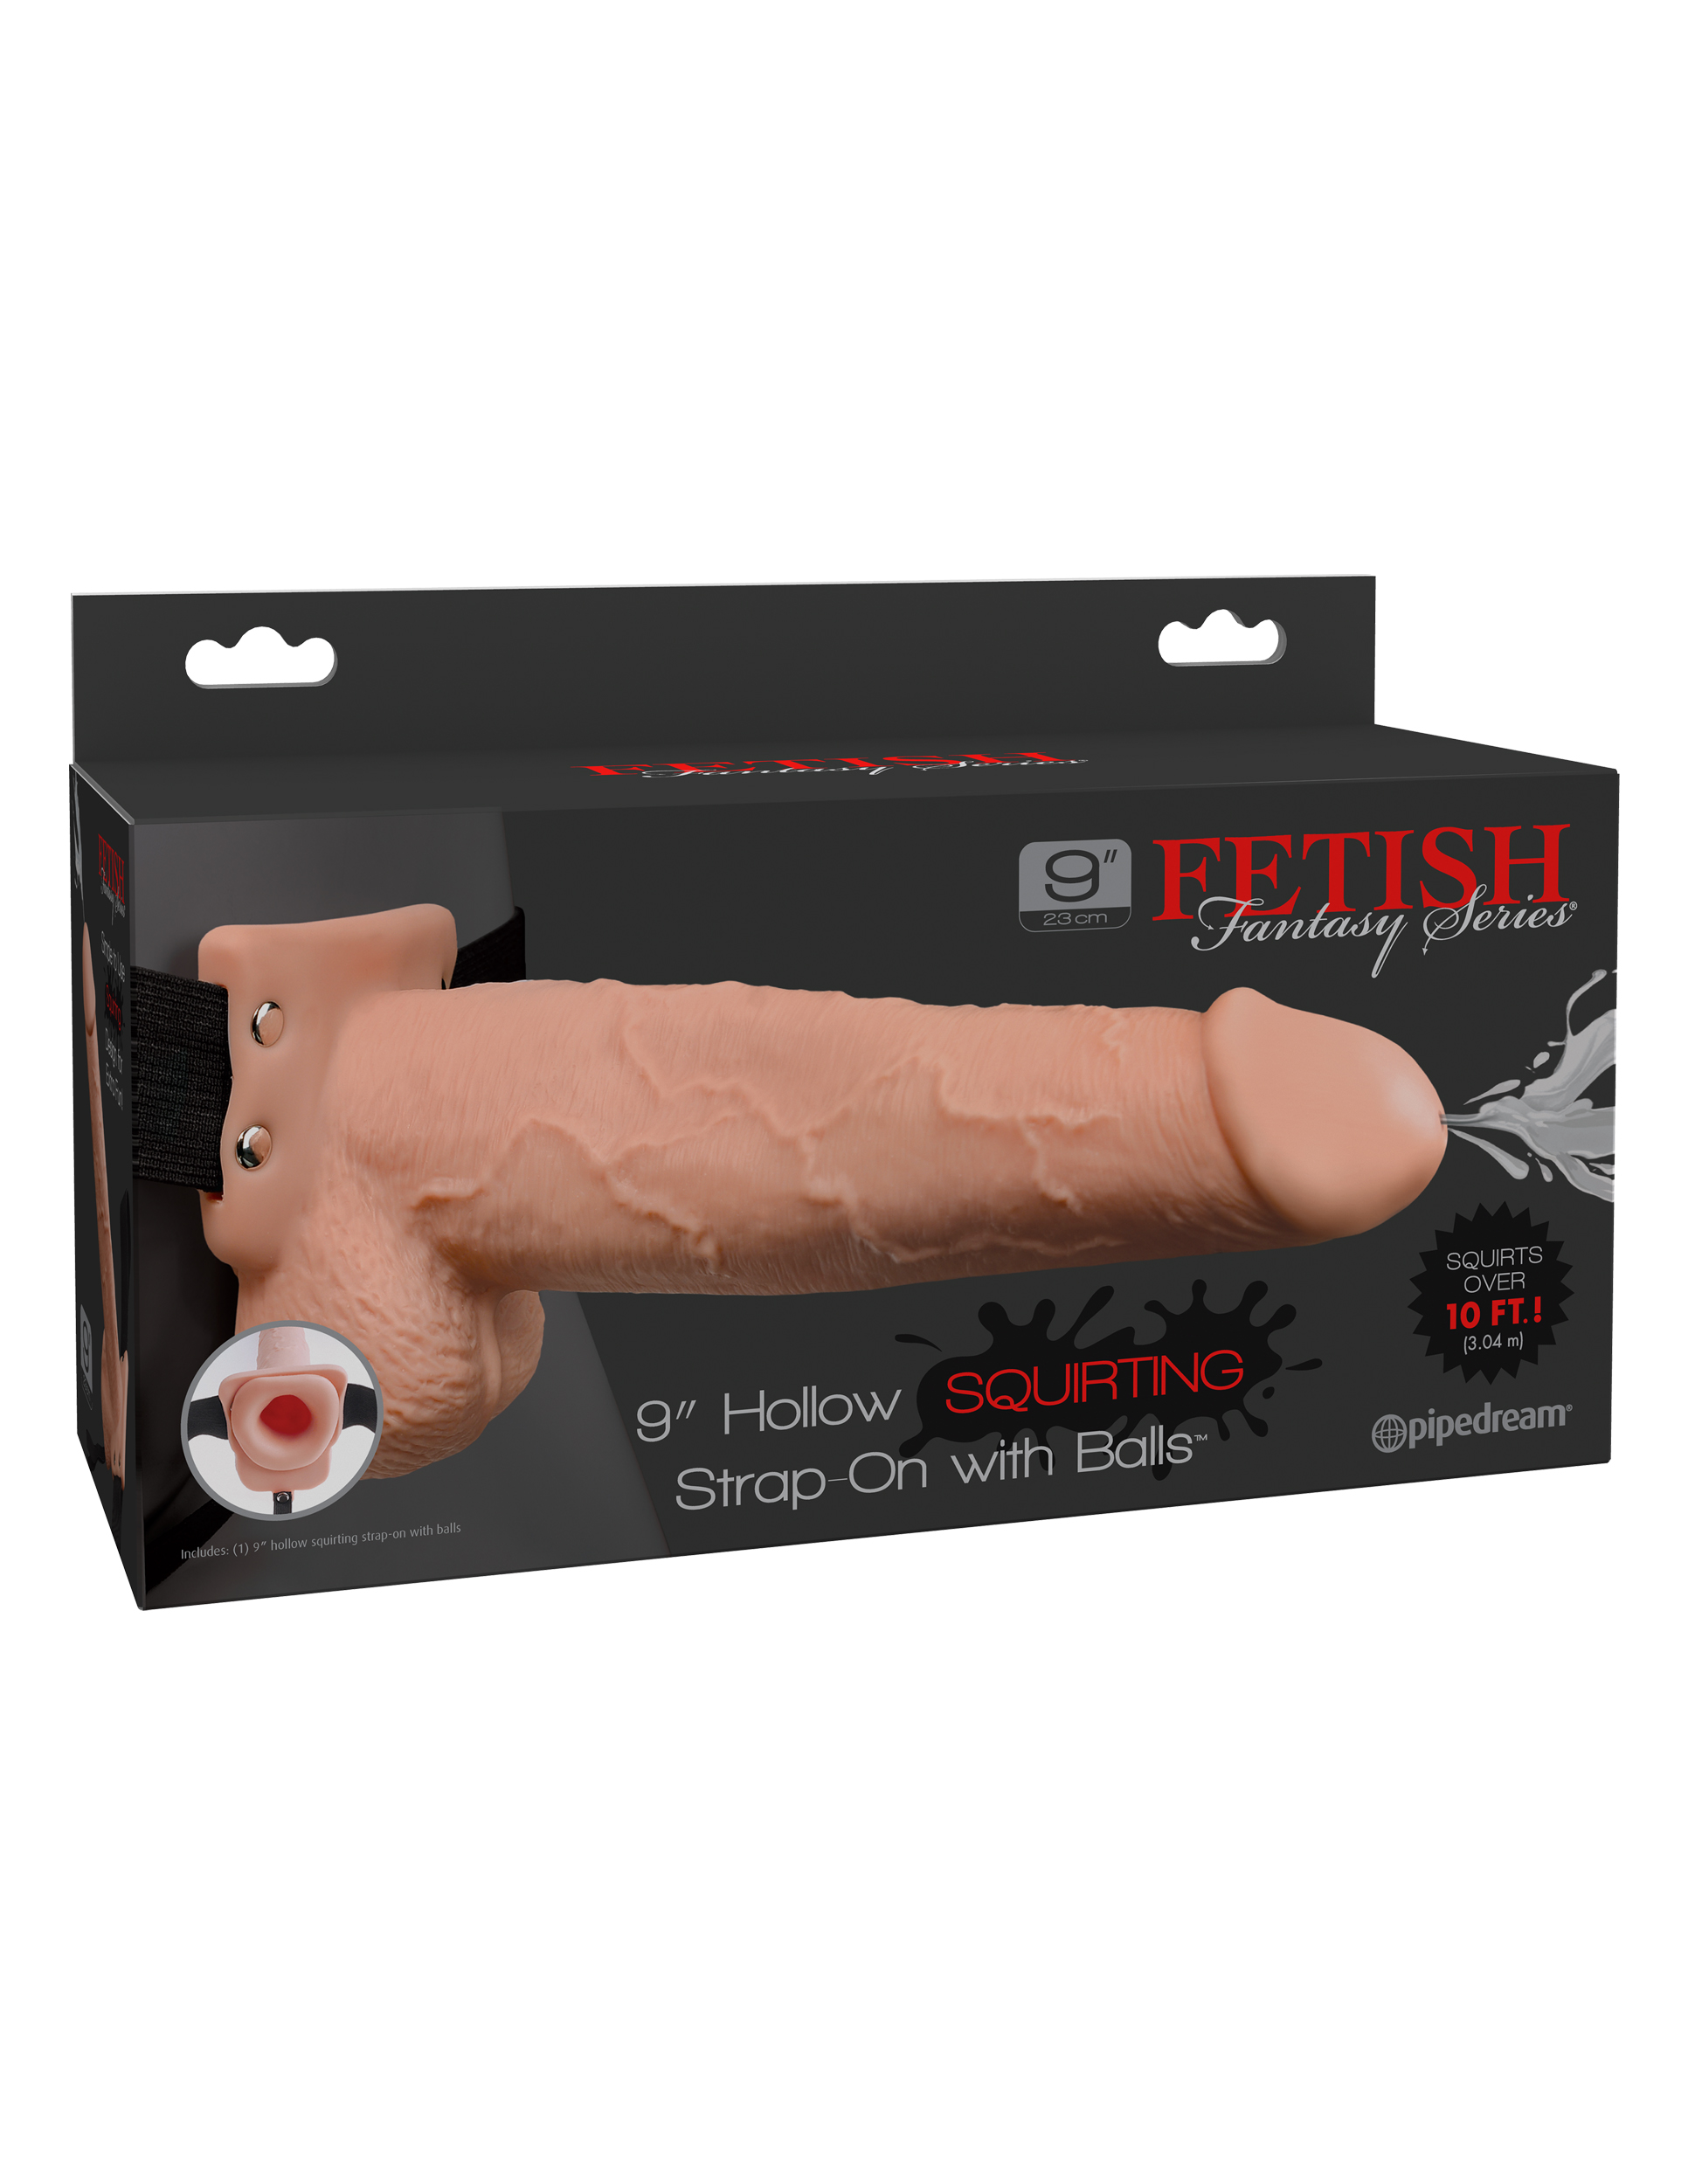 FETISH FANTASY 9 IN HOLLOW SQUIRTING STRAP-ON W/ BALLS FLESH - PD339821